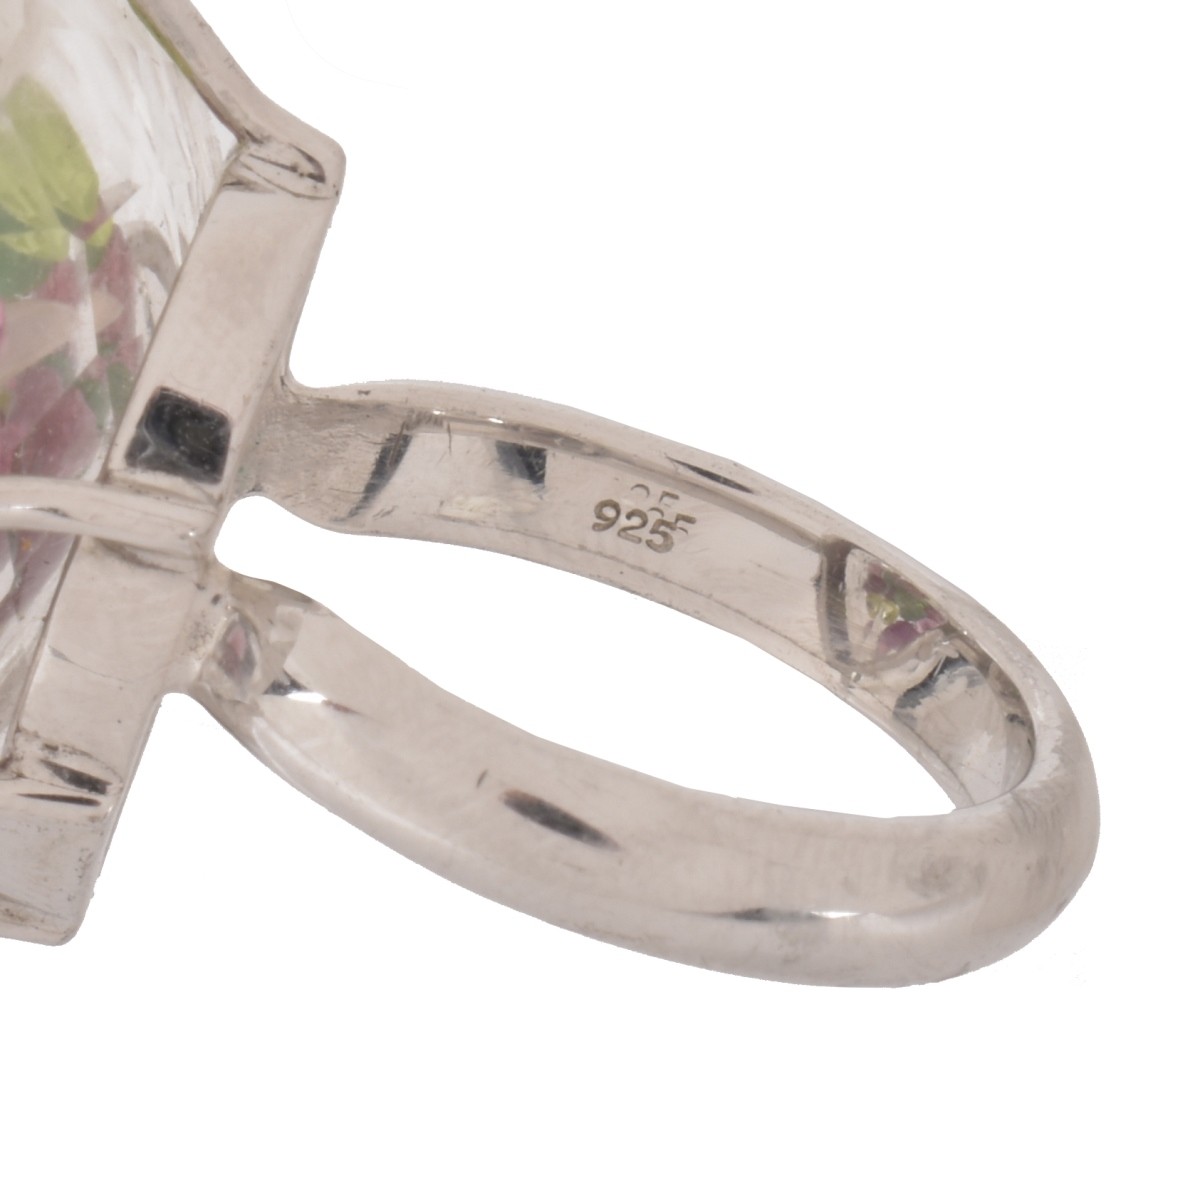 Gemstone and Silver Ring